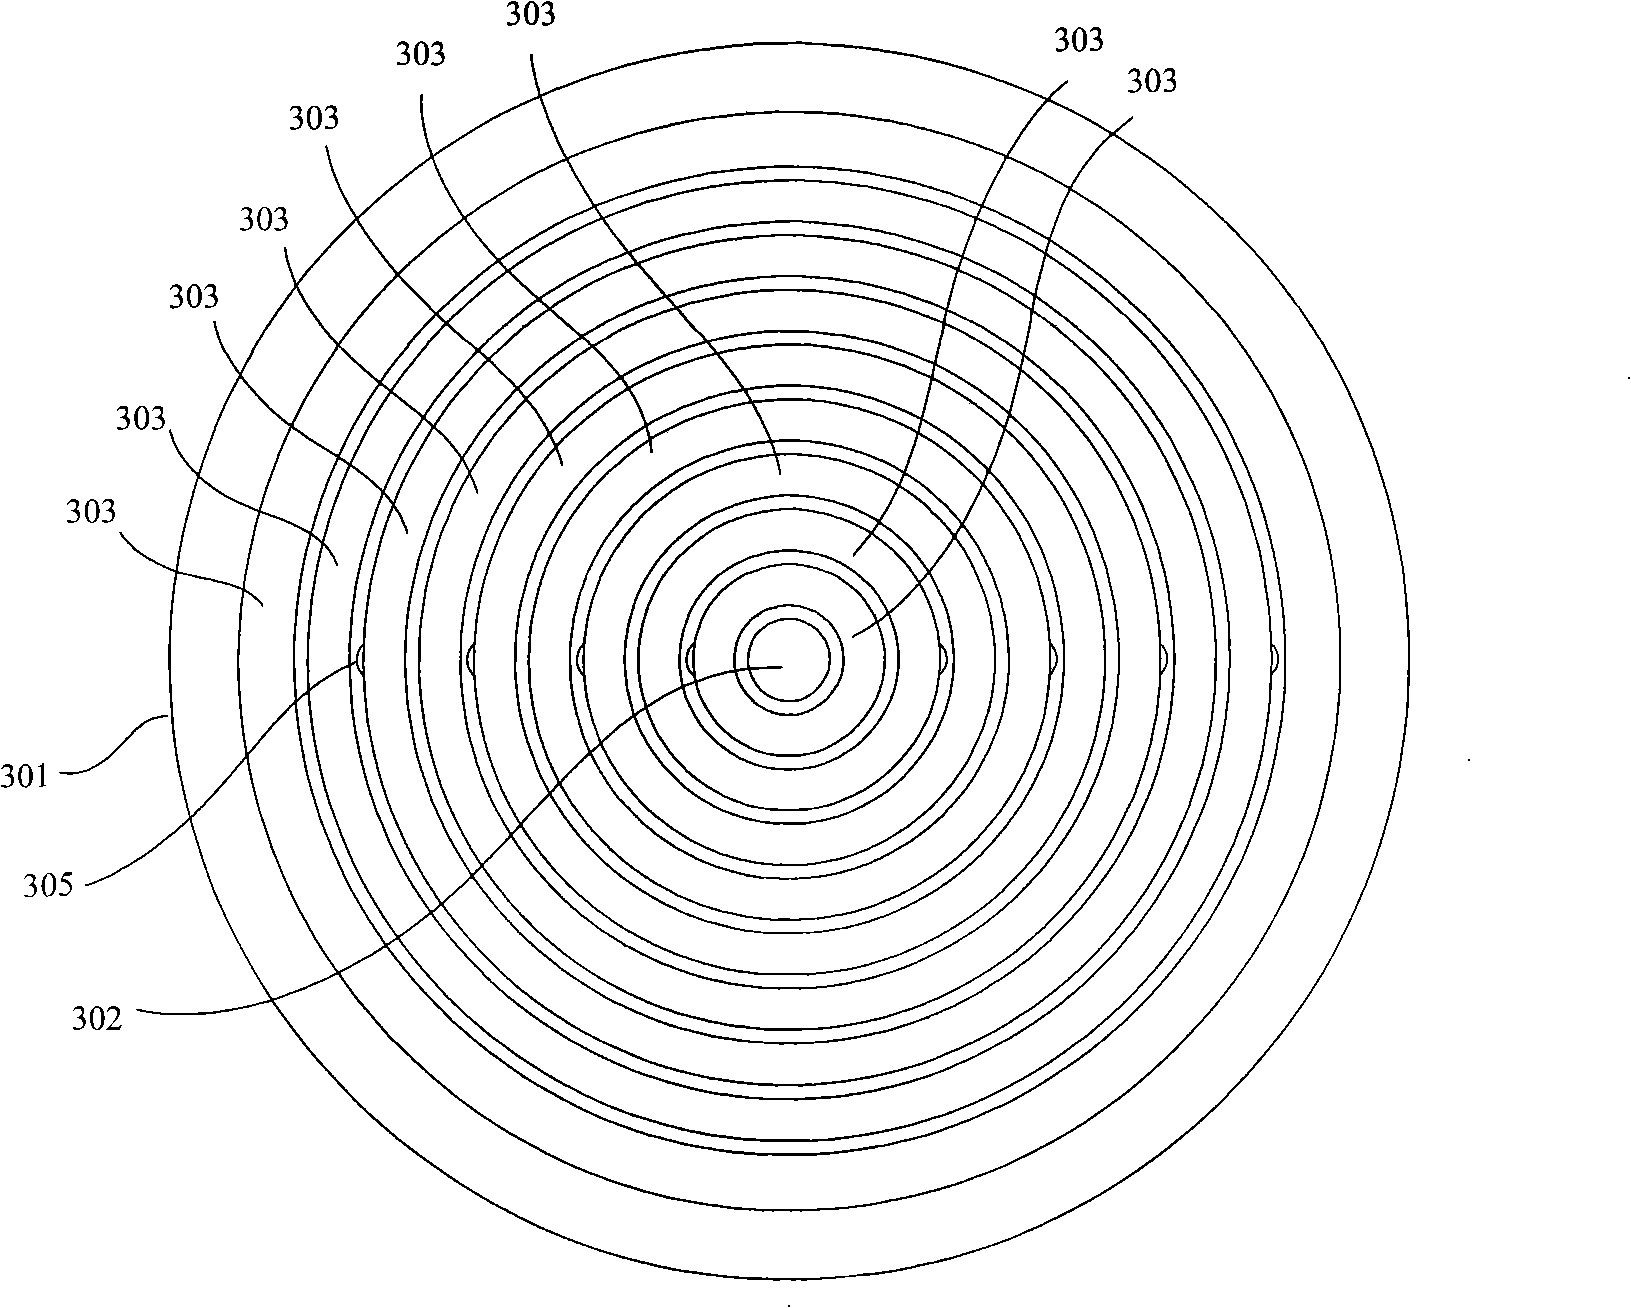 Plume diagnosis device of electric propulsion engine